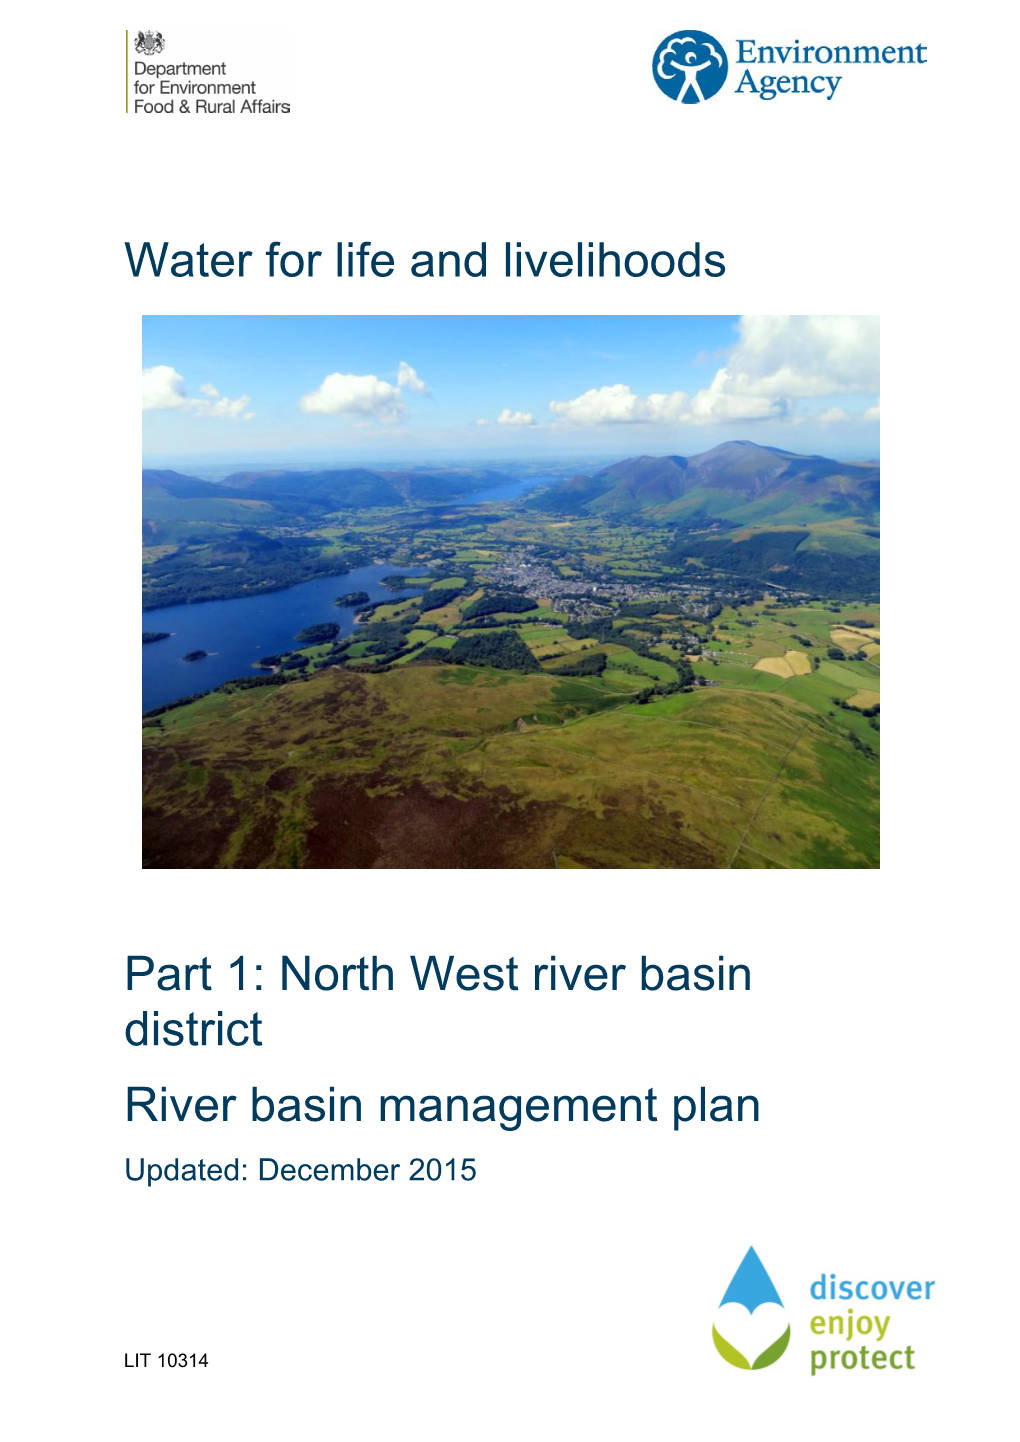 Water for Life and Livelihoods Part 1: North West River Basin District River